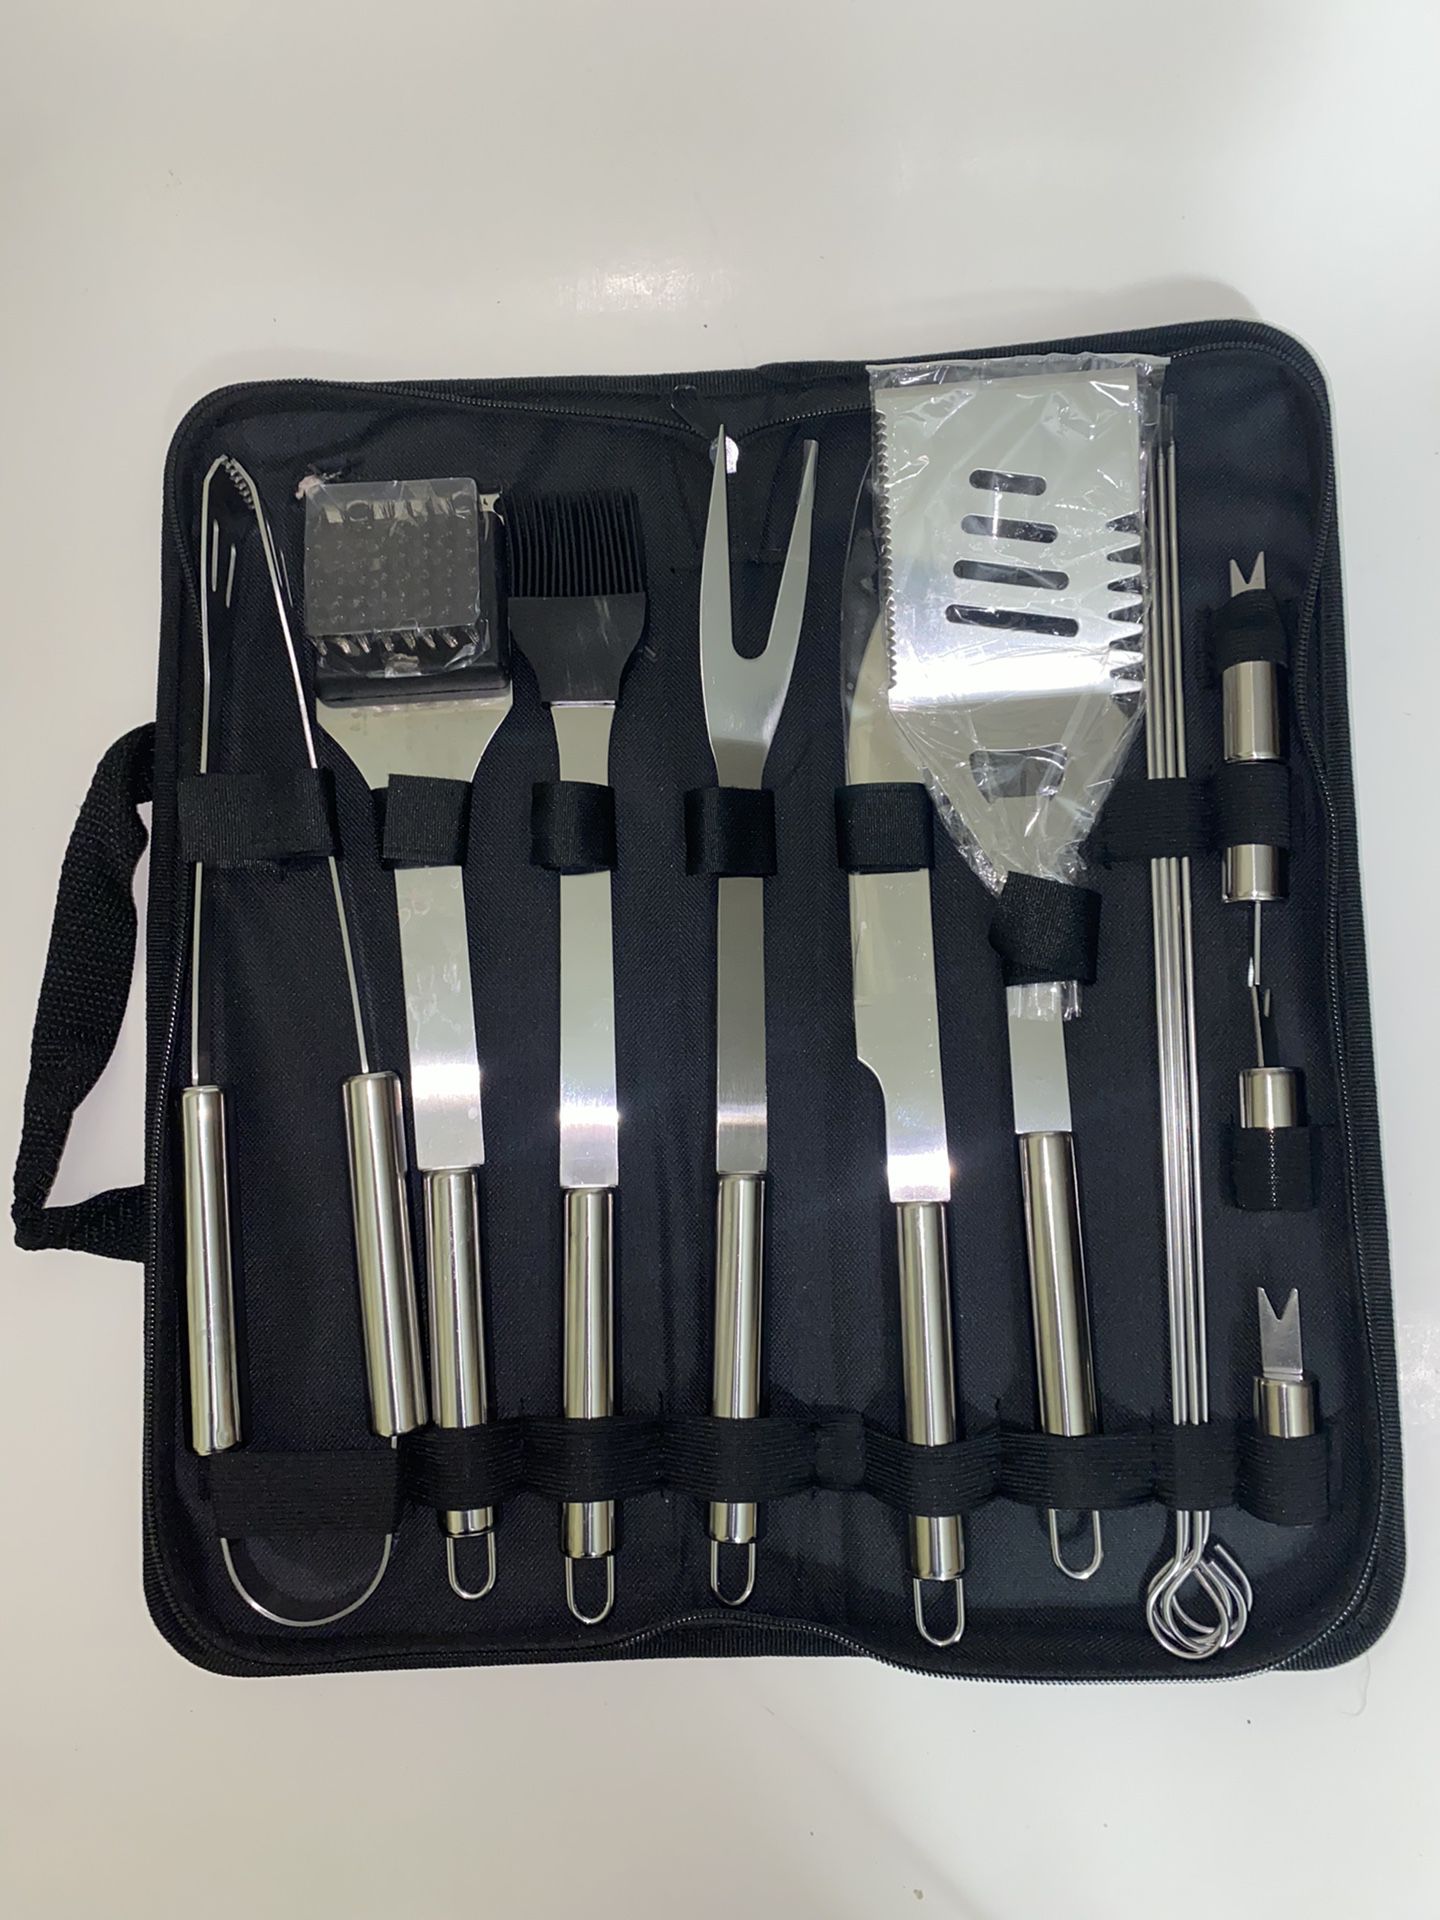 Anpro Grilling Accessories BBQ Tools Set, 21 PCS Stainless Steel Grill Kit with Case, Great Barbecue Utensil Tool for Men, Women, Dad